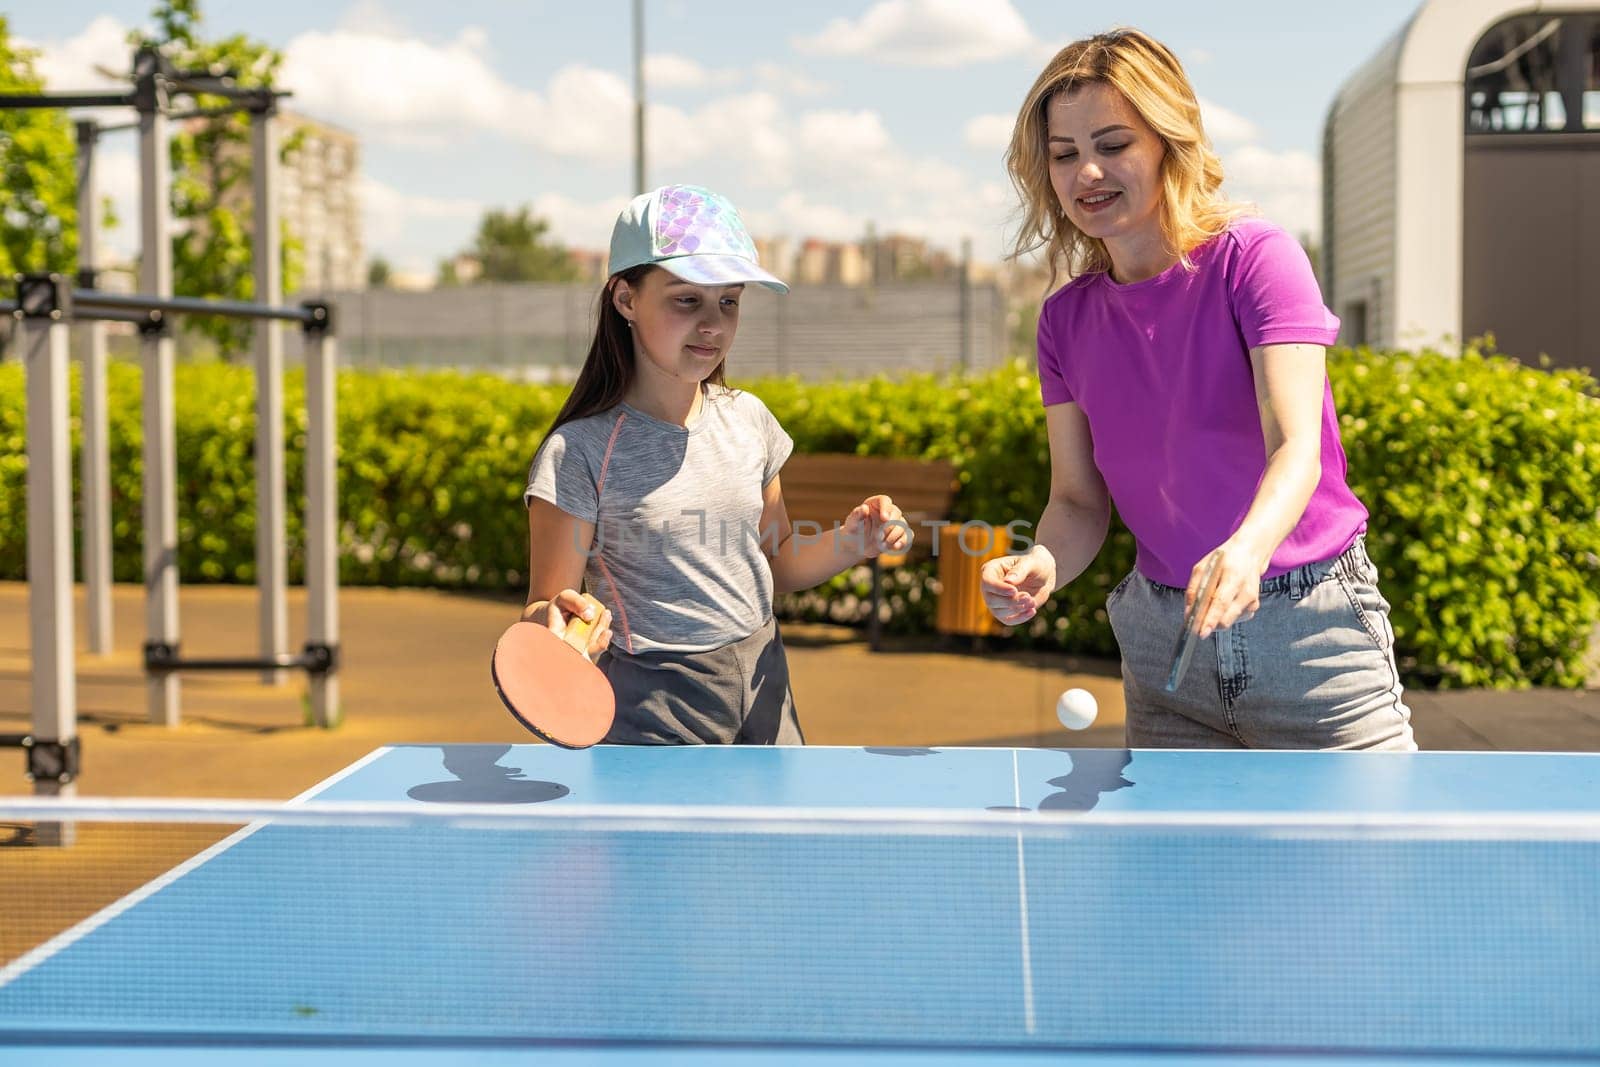 Young woman with her daughter playing ping pong in park.